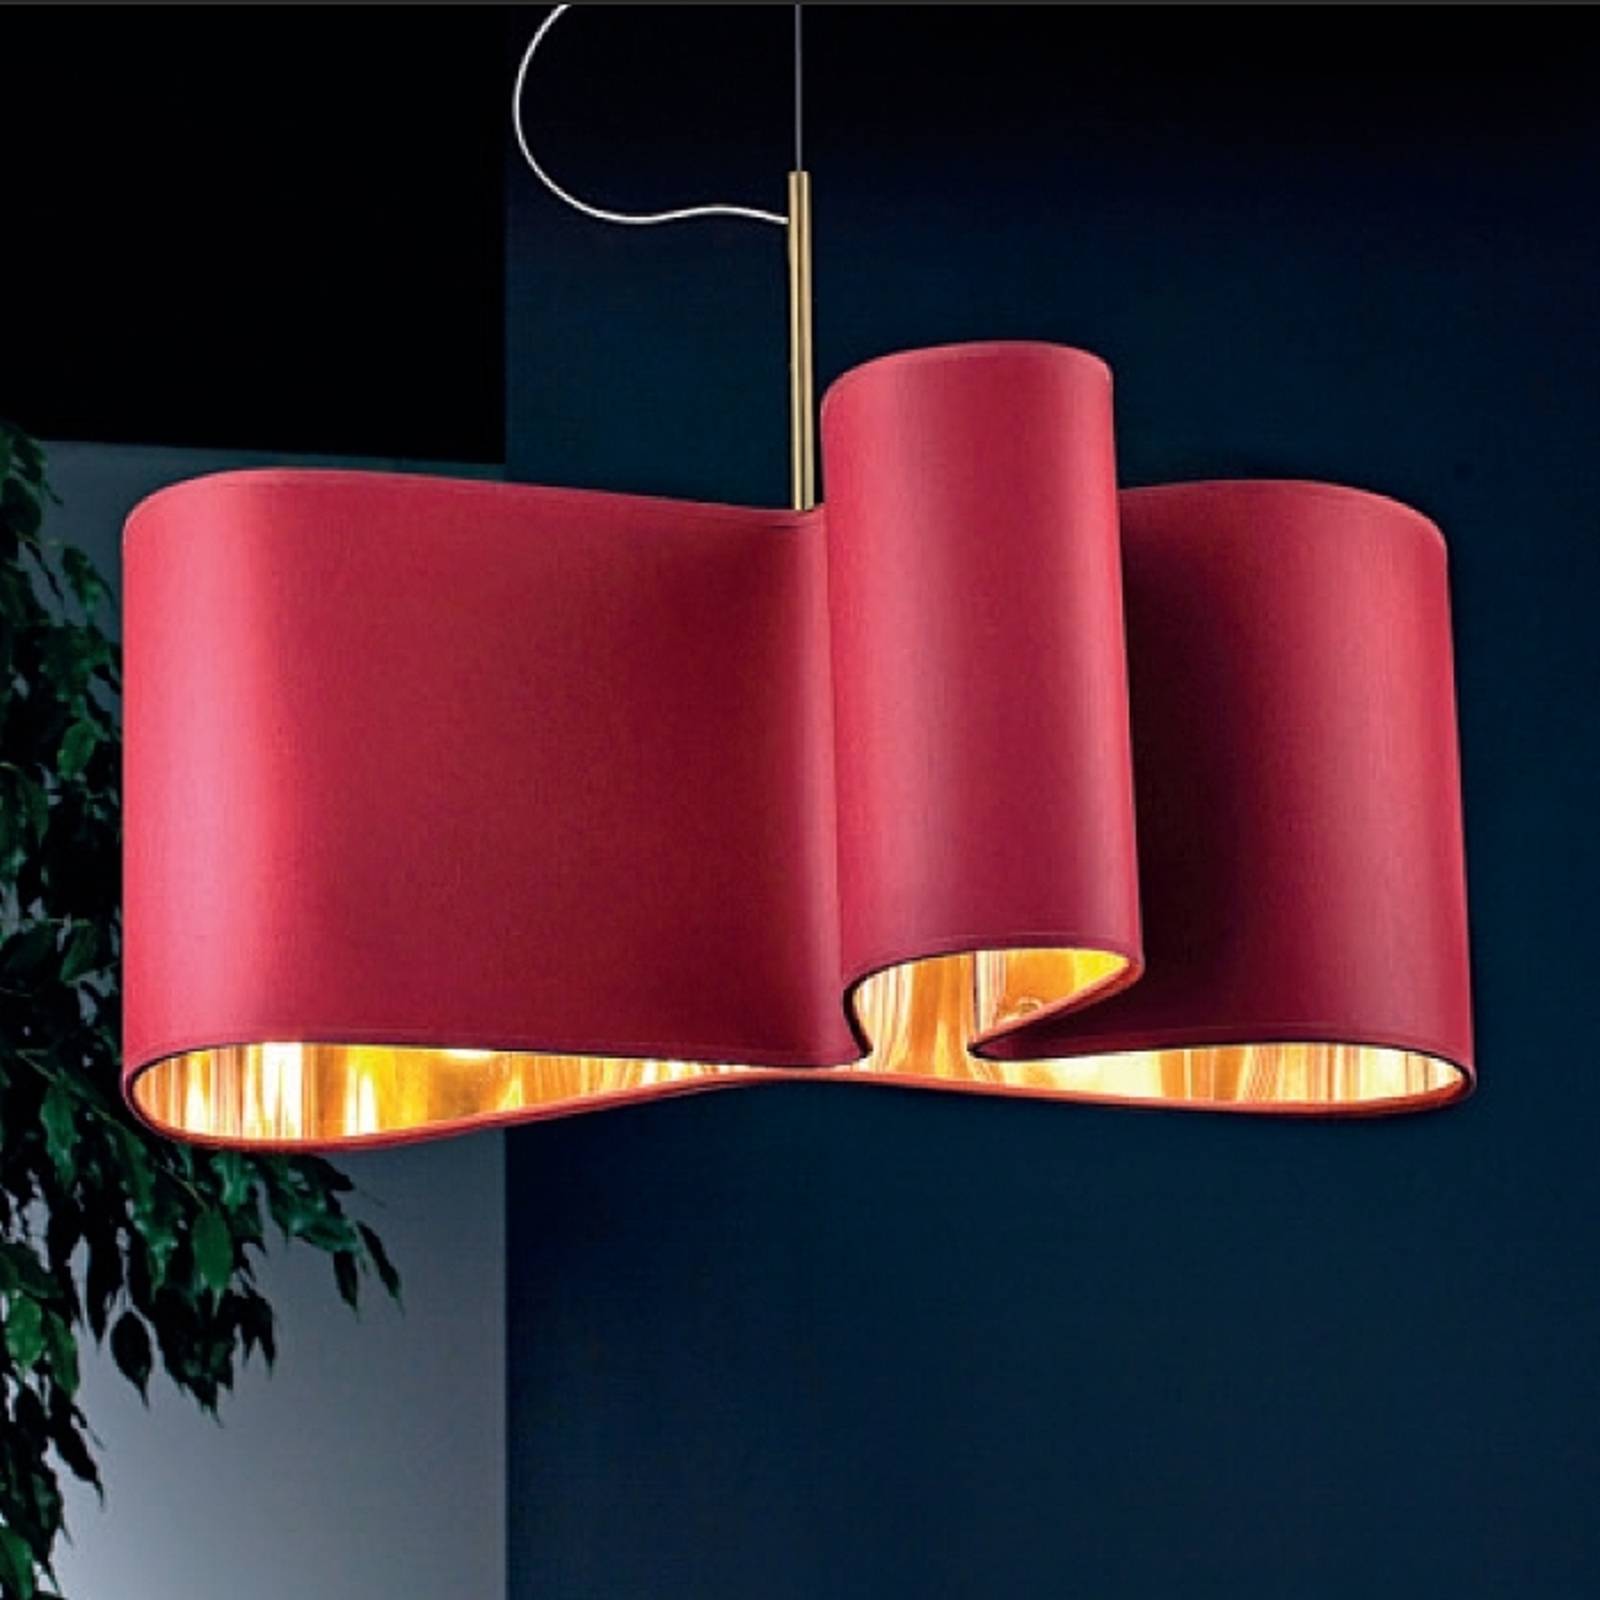 Mugello hanging light in red and gold